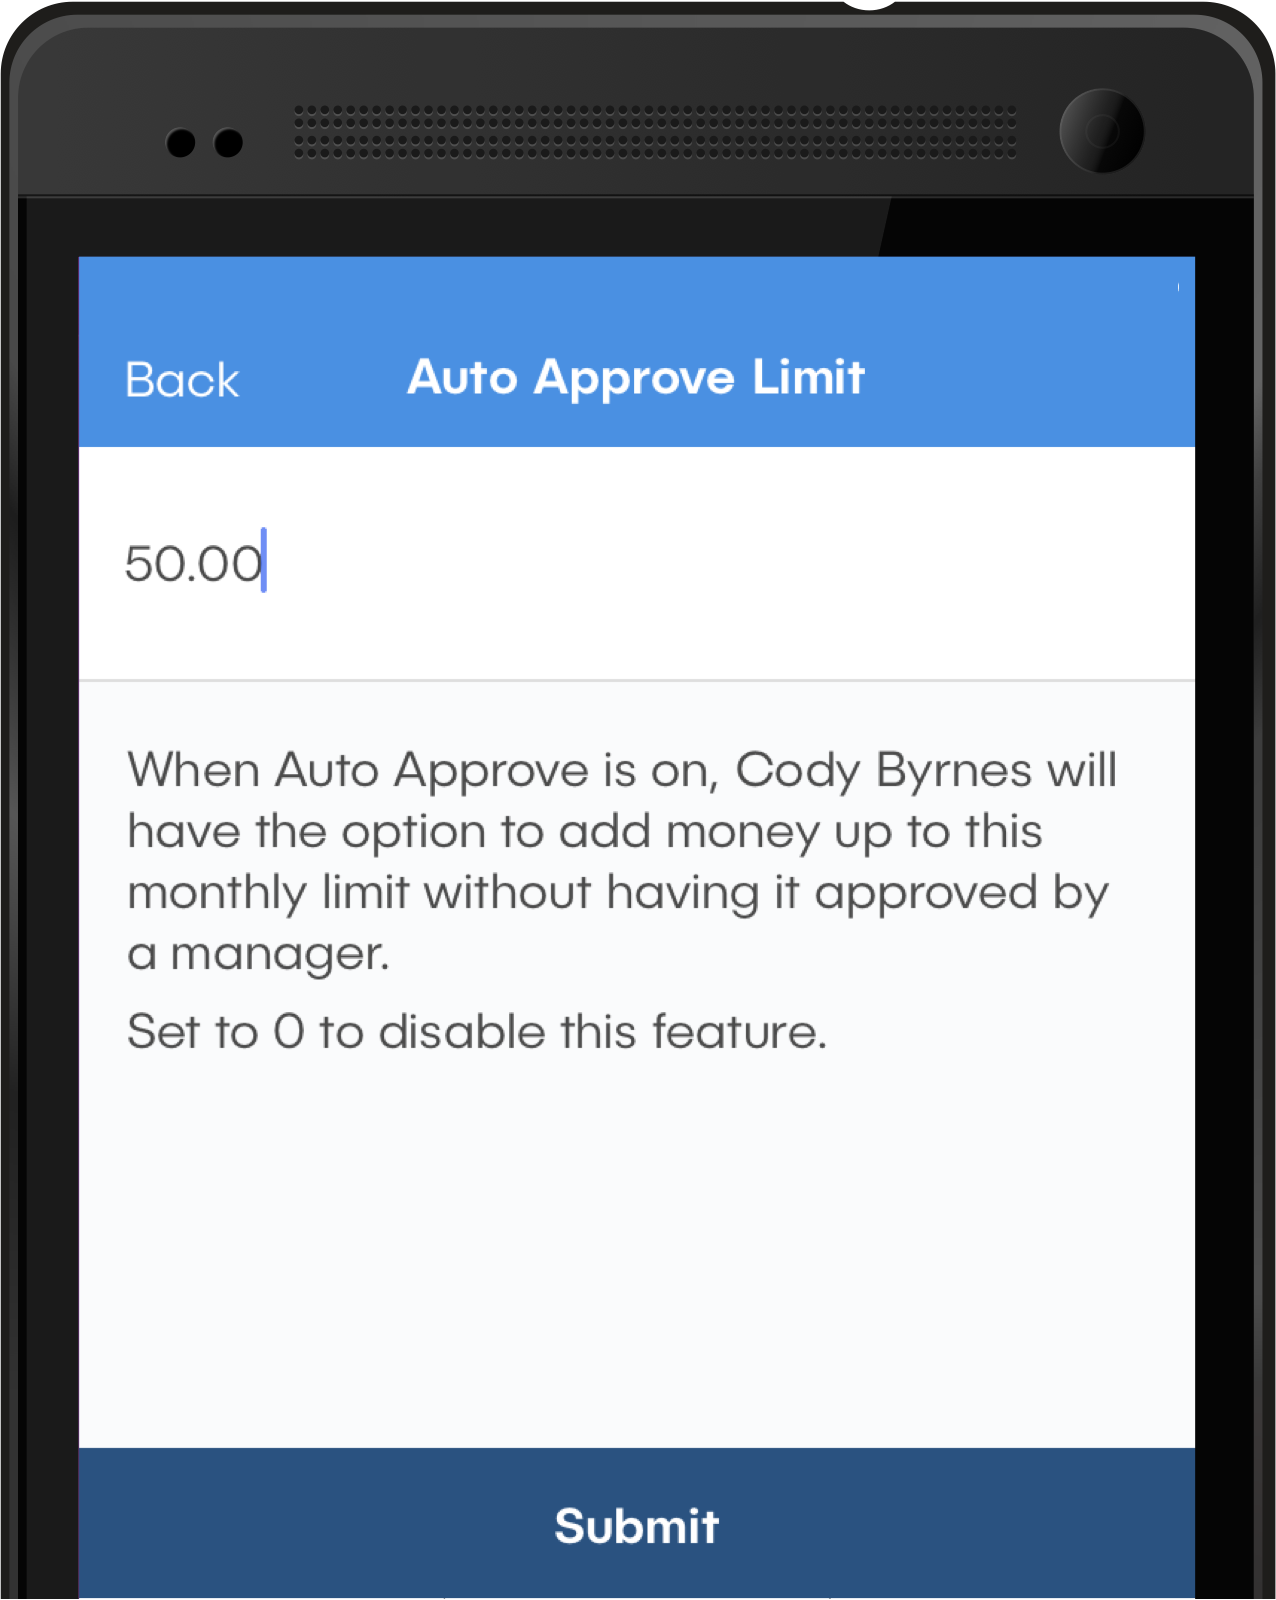 Image of phone running the dash™ app showing the Auto Approve Limit screen. The user has entered a limit of $50.